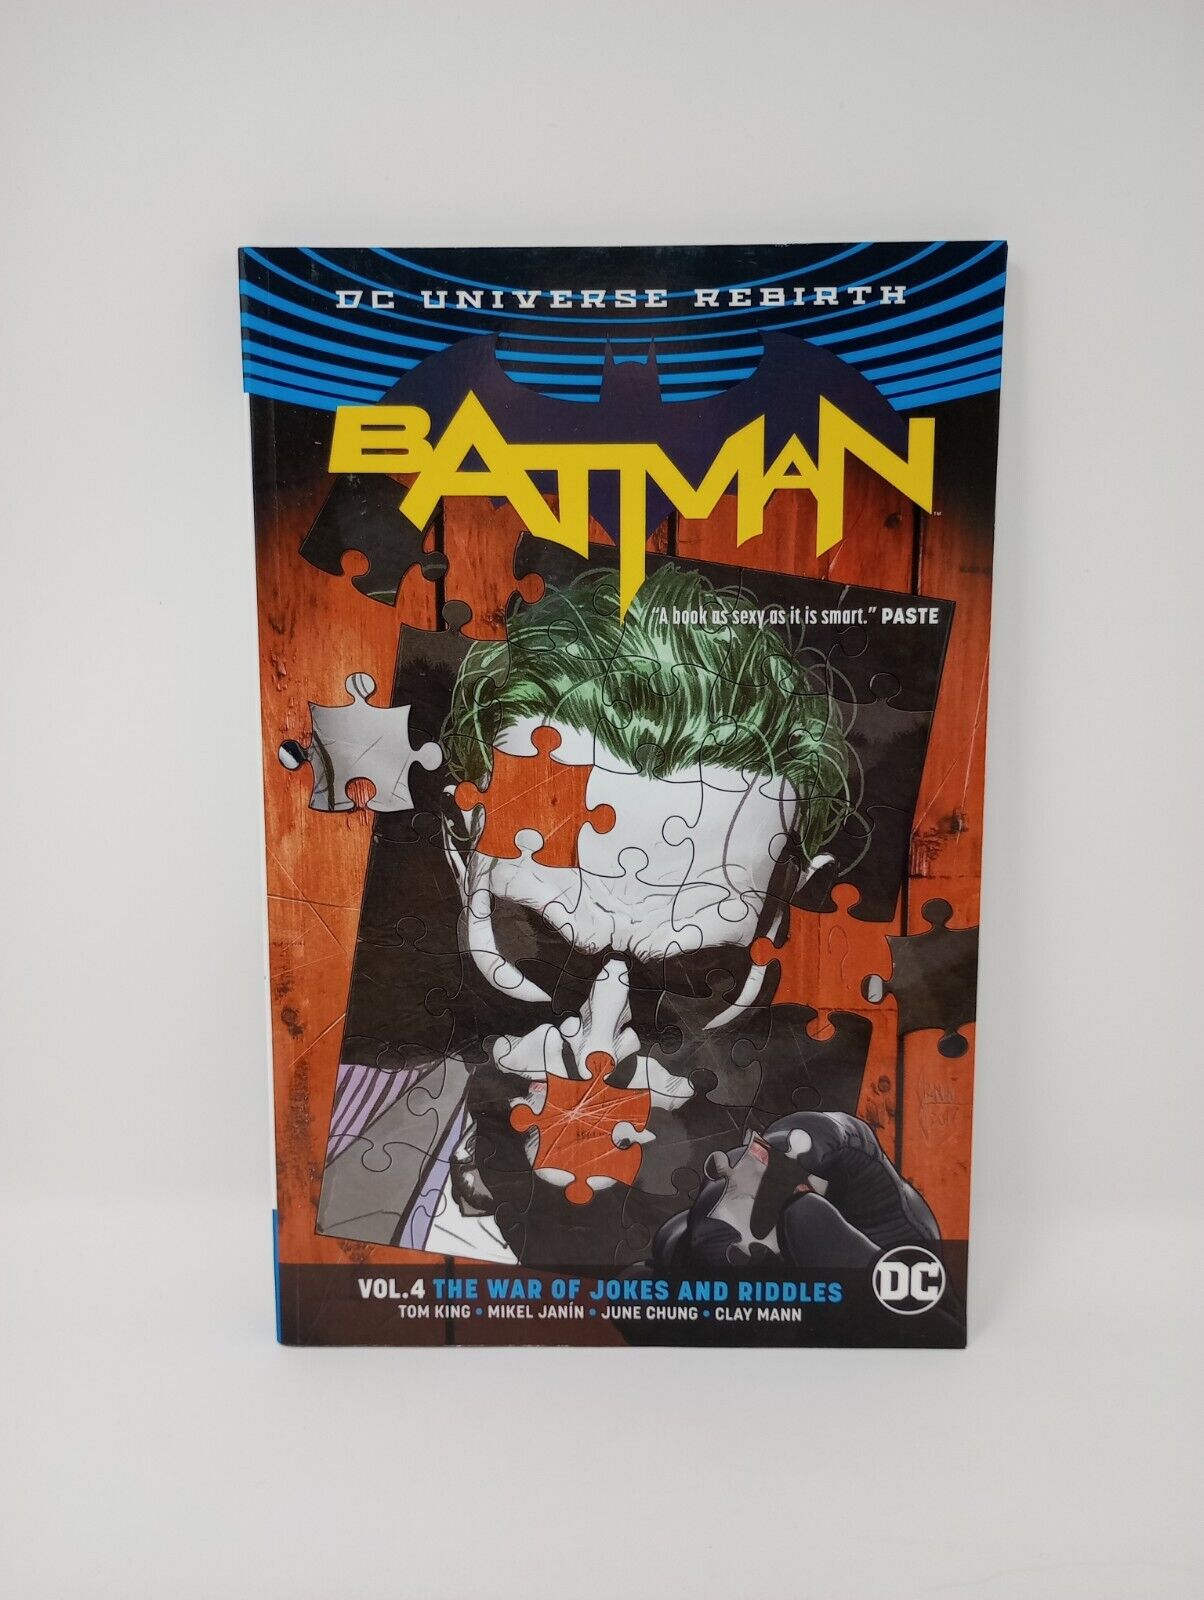 Batman Vol. 4: The War of Jokes and Riddles (Rebirth) by Tom King: Used